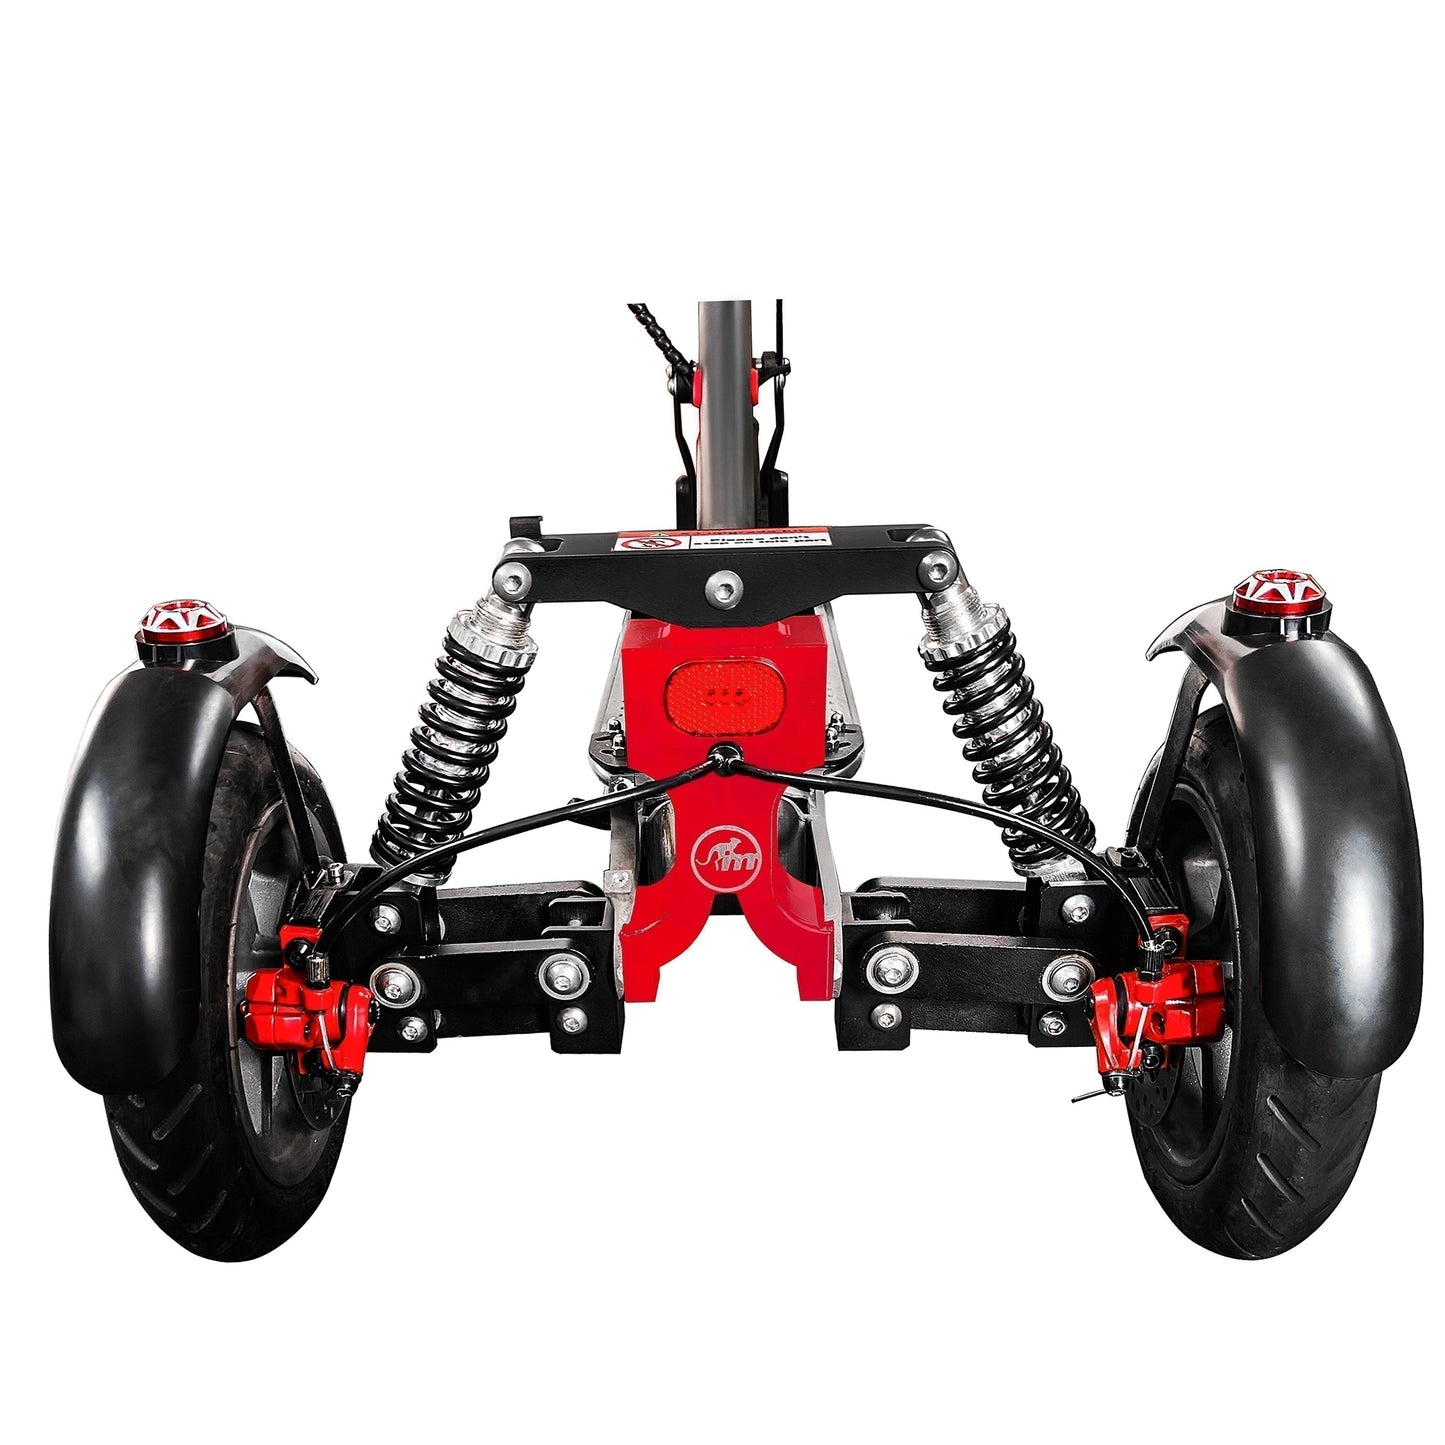 Monorim X3 upgrade kit to be Three wheels special for Hover-1 journey frames